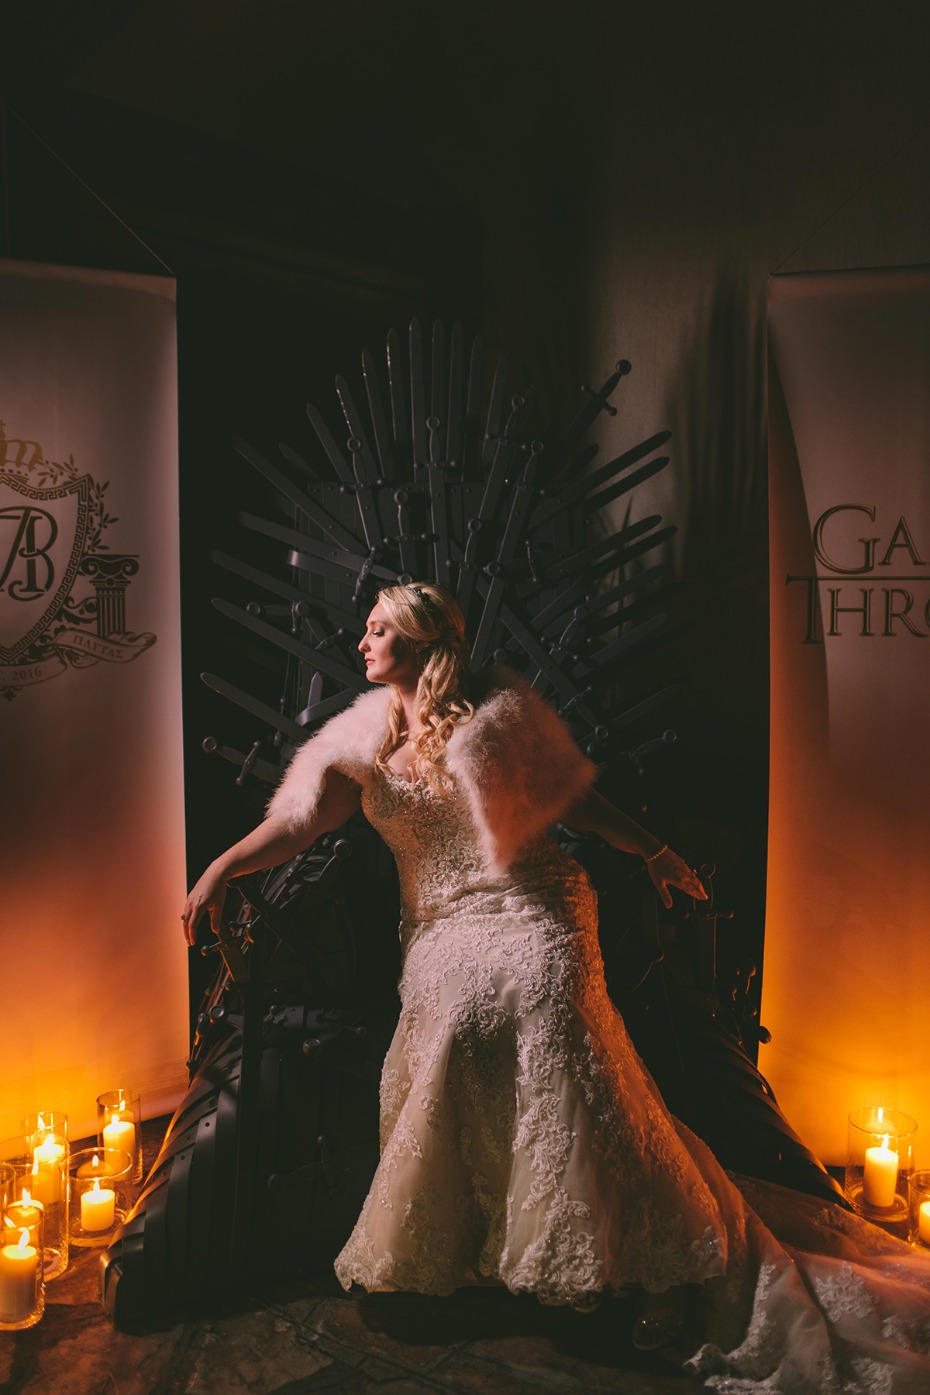 Game of Thrones photo booth